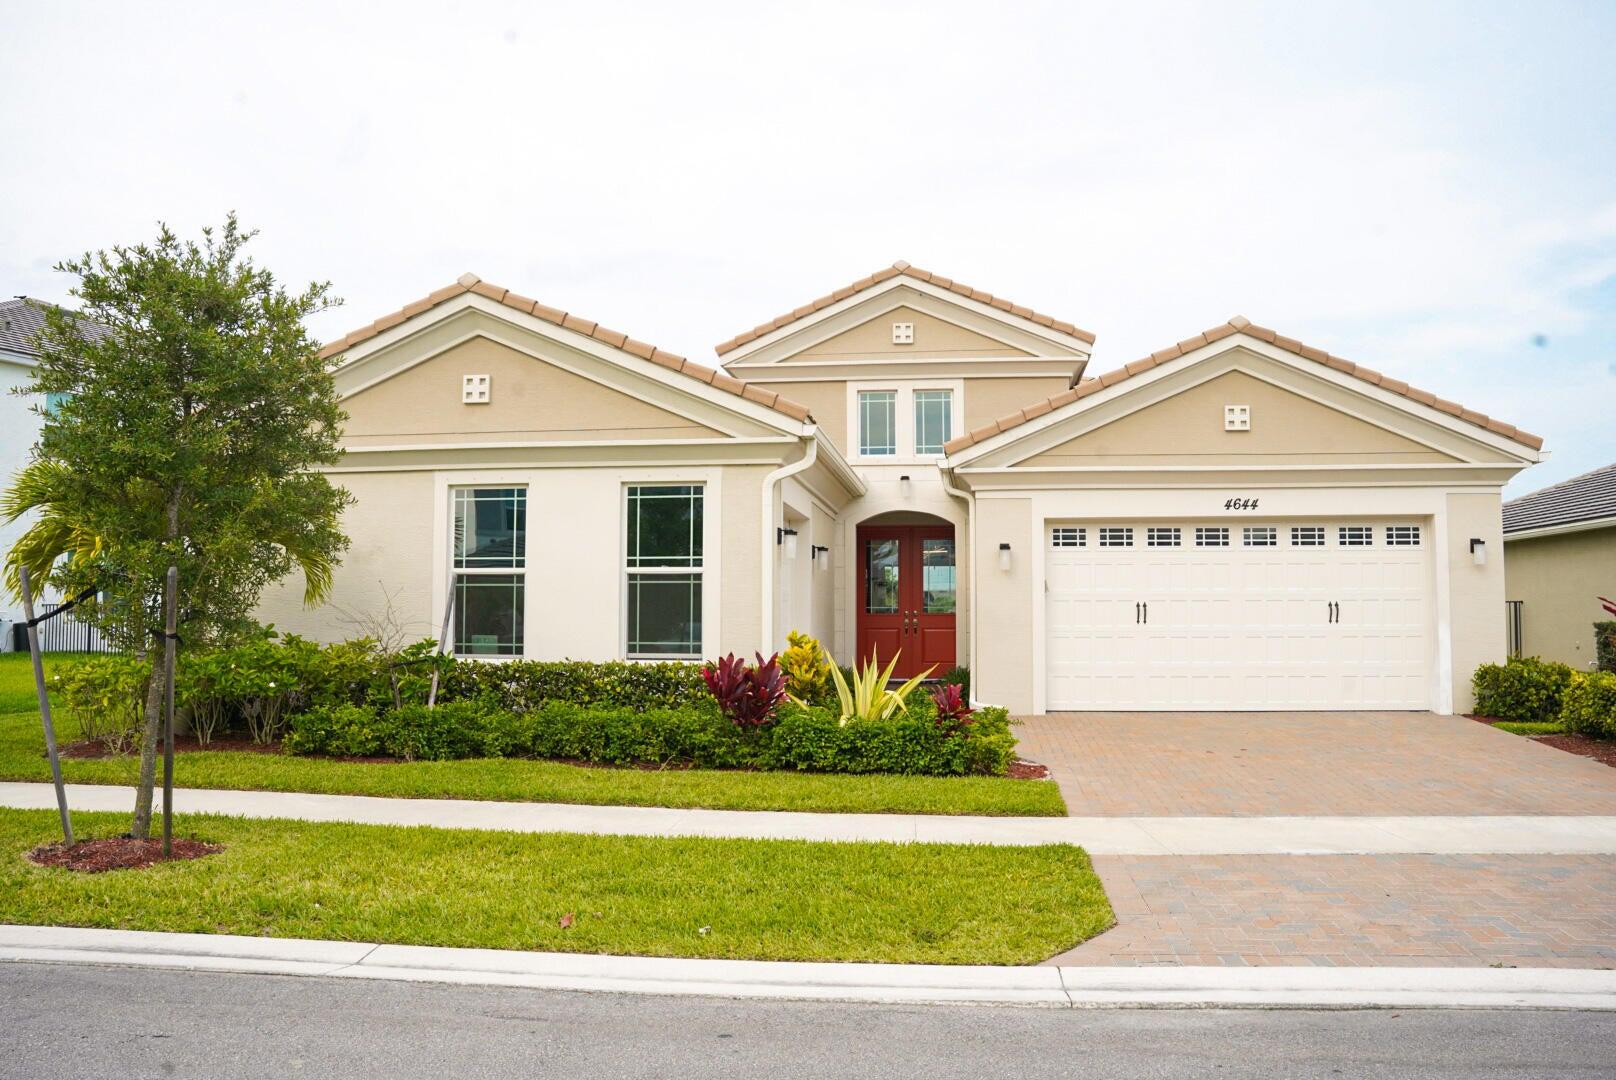 4644 Canopy Grove Drive, Westlake, Palm Beach County, Florida - 4 Bedrooms  
4 Bathrooms - 